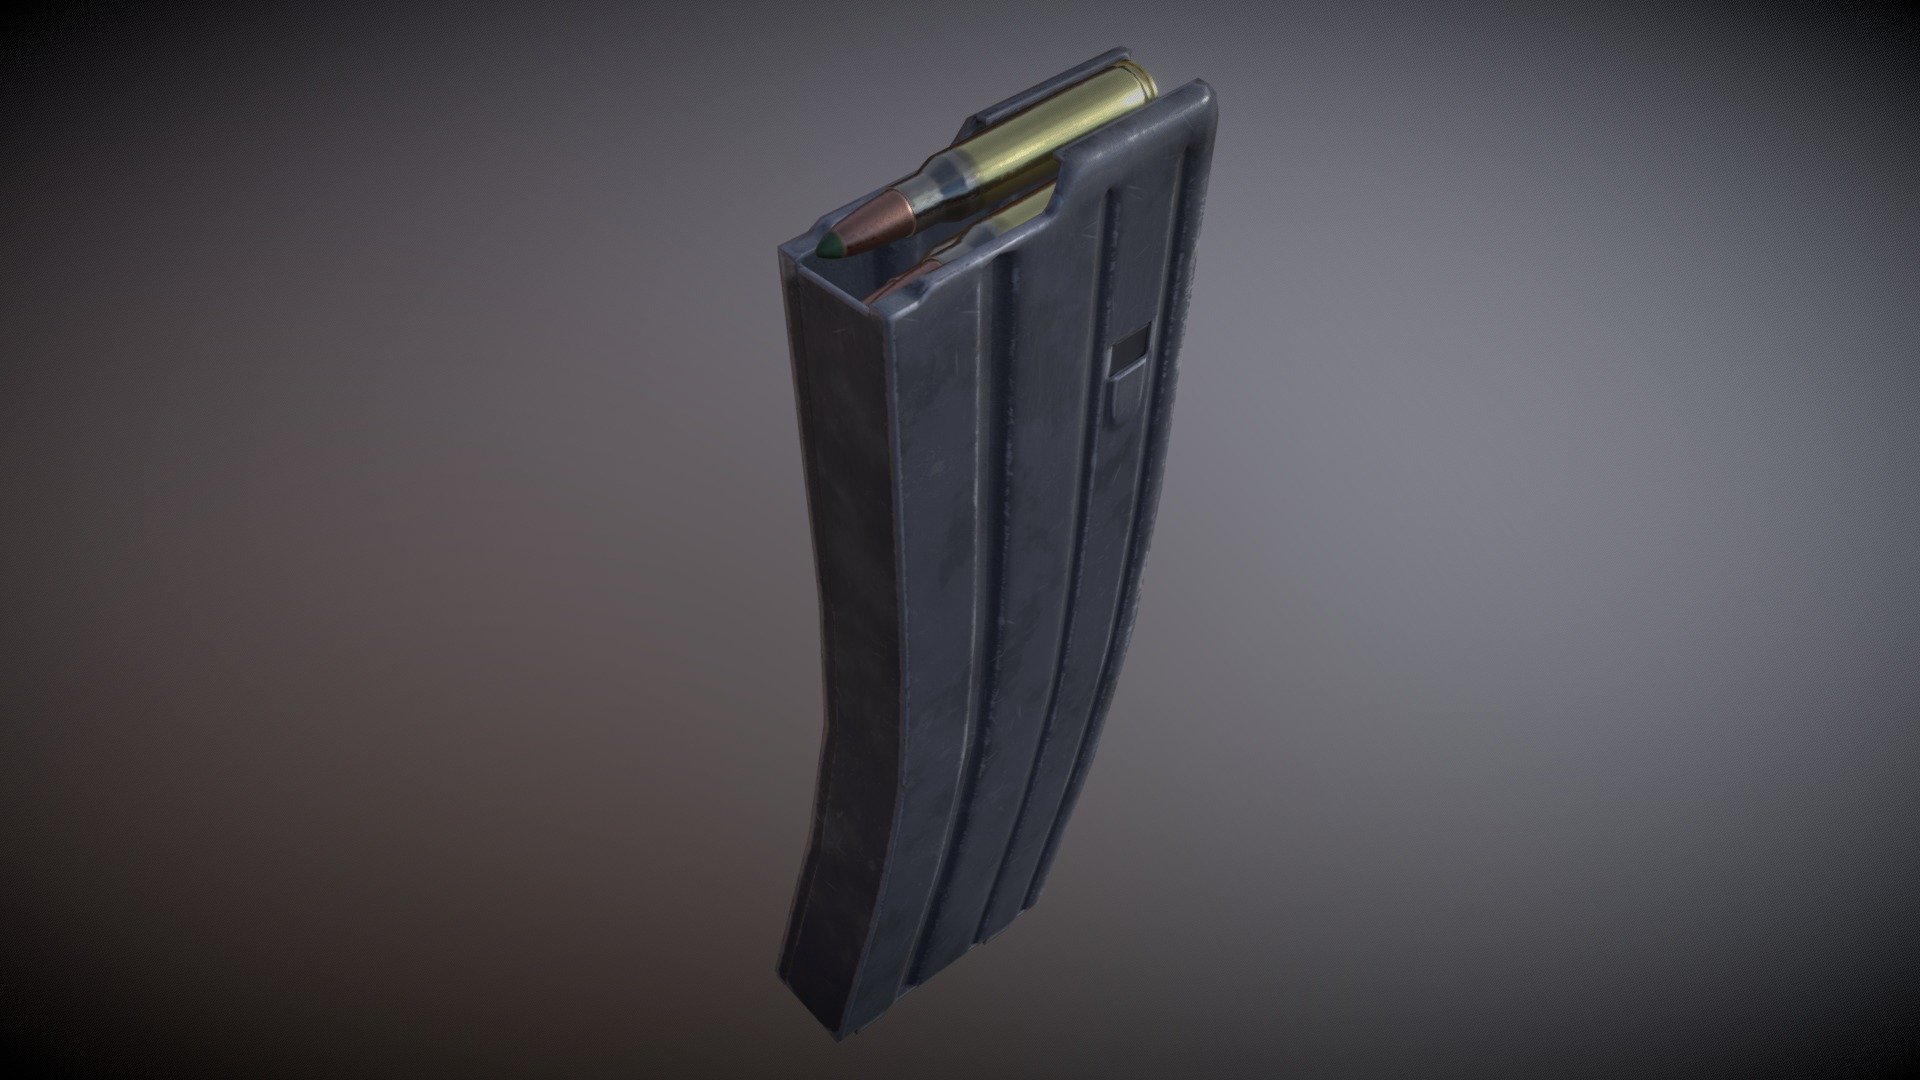 A Low Poly PBR textured model of a magazine of AR type of rifle. A standard US army issued magazine was used as a refference. 
Bullets inside has a green tips whichm means armor penetrator ammo.
The model can be used in Unity, Unreal and other engines with PBR support.
This magazine can be used with theese types of assault rifles:
M4/M16
HK416
FN SCAR-L
Magpul Masada 
Bushmaster ACR
Sometimes H&amp;K G36
etc - AR Rifle 30 Round Magazine - 3D model by p1aym 3d model